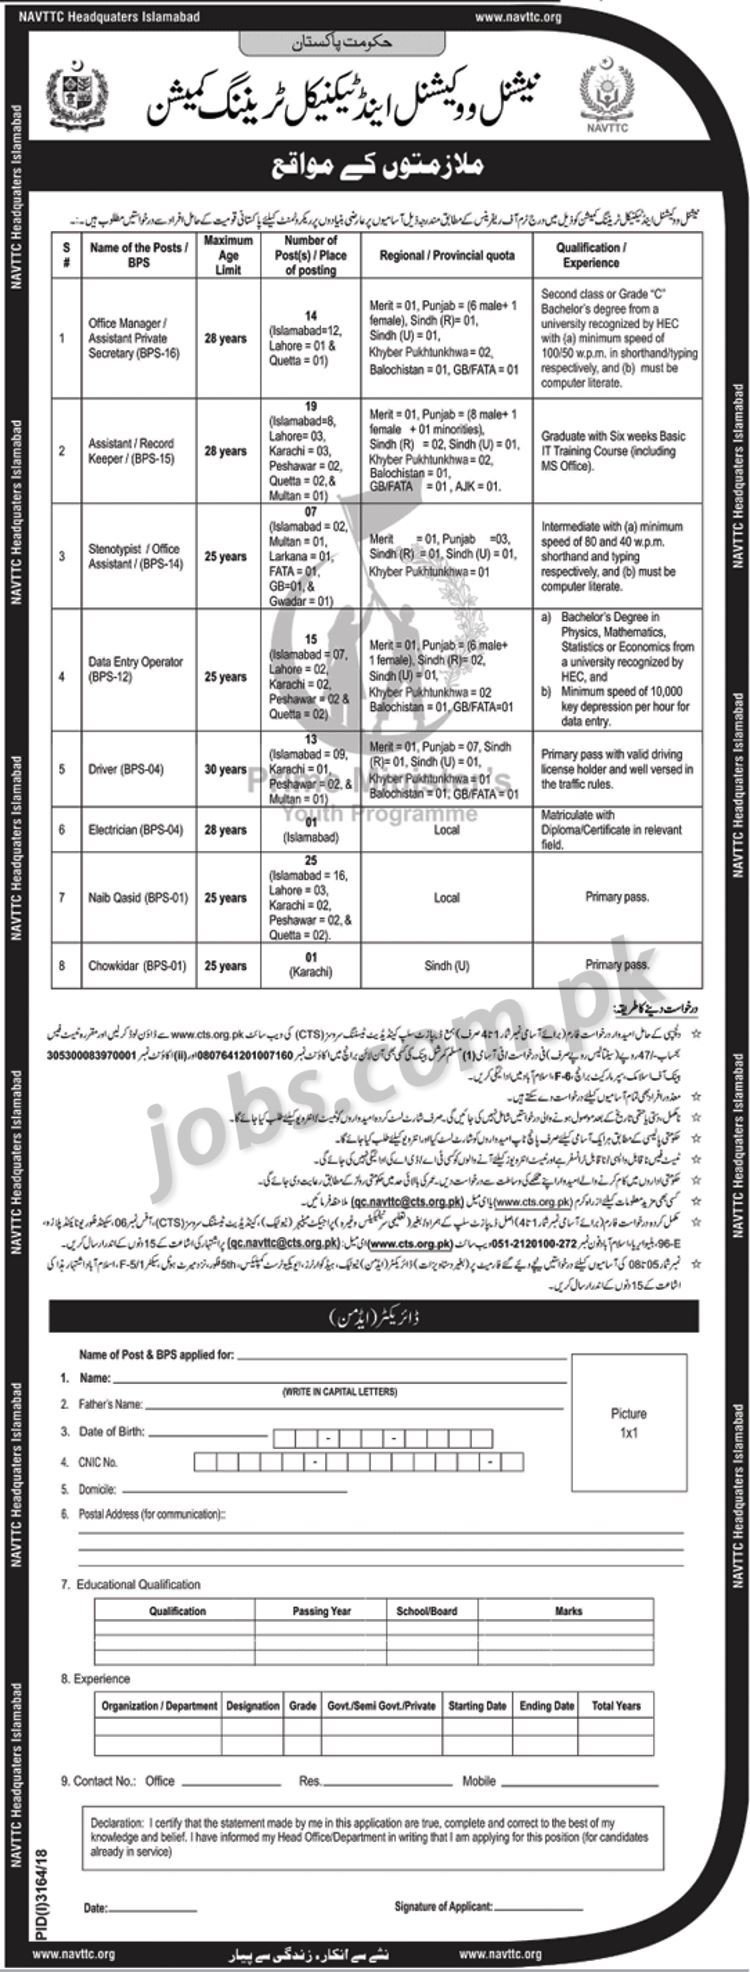 NAVTTC Commission Jobs 2019 for 95+ Assistants, Record Keepers, DEO, Stenotypists, IT, Managers & Other Posts (Download CTS Form)